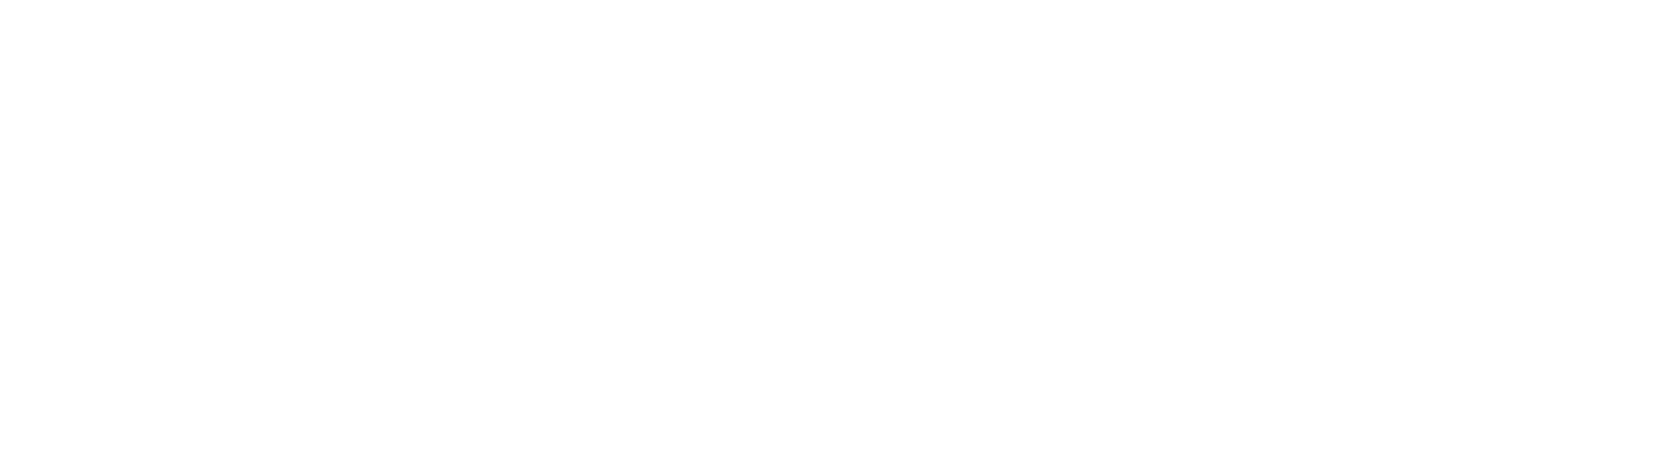 5k for Justice